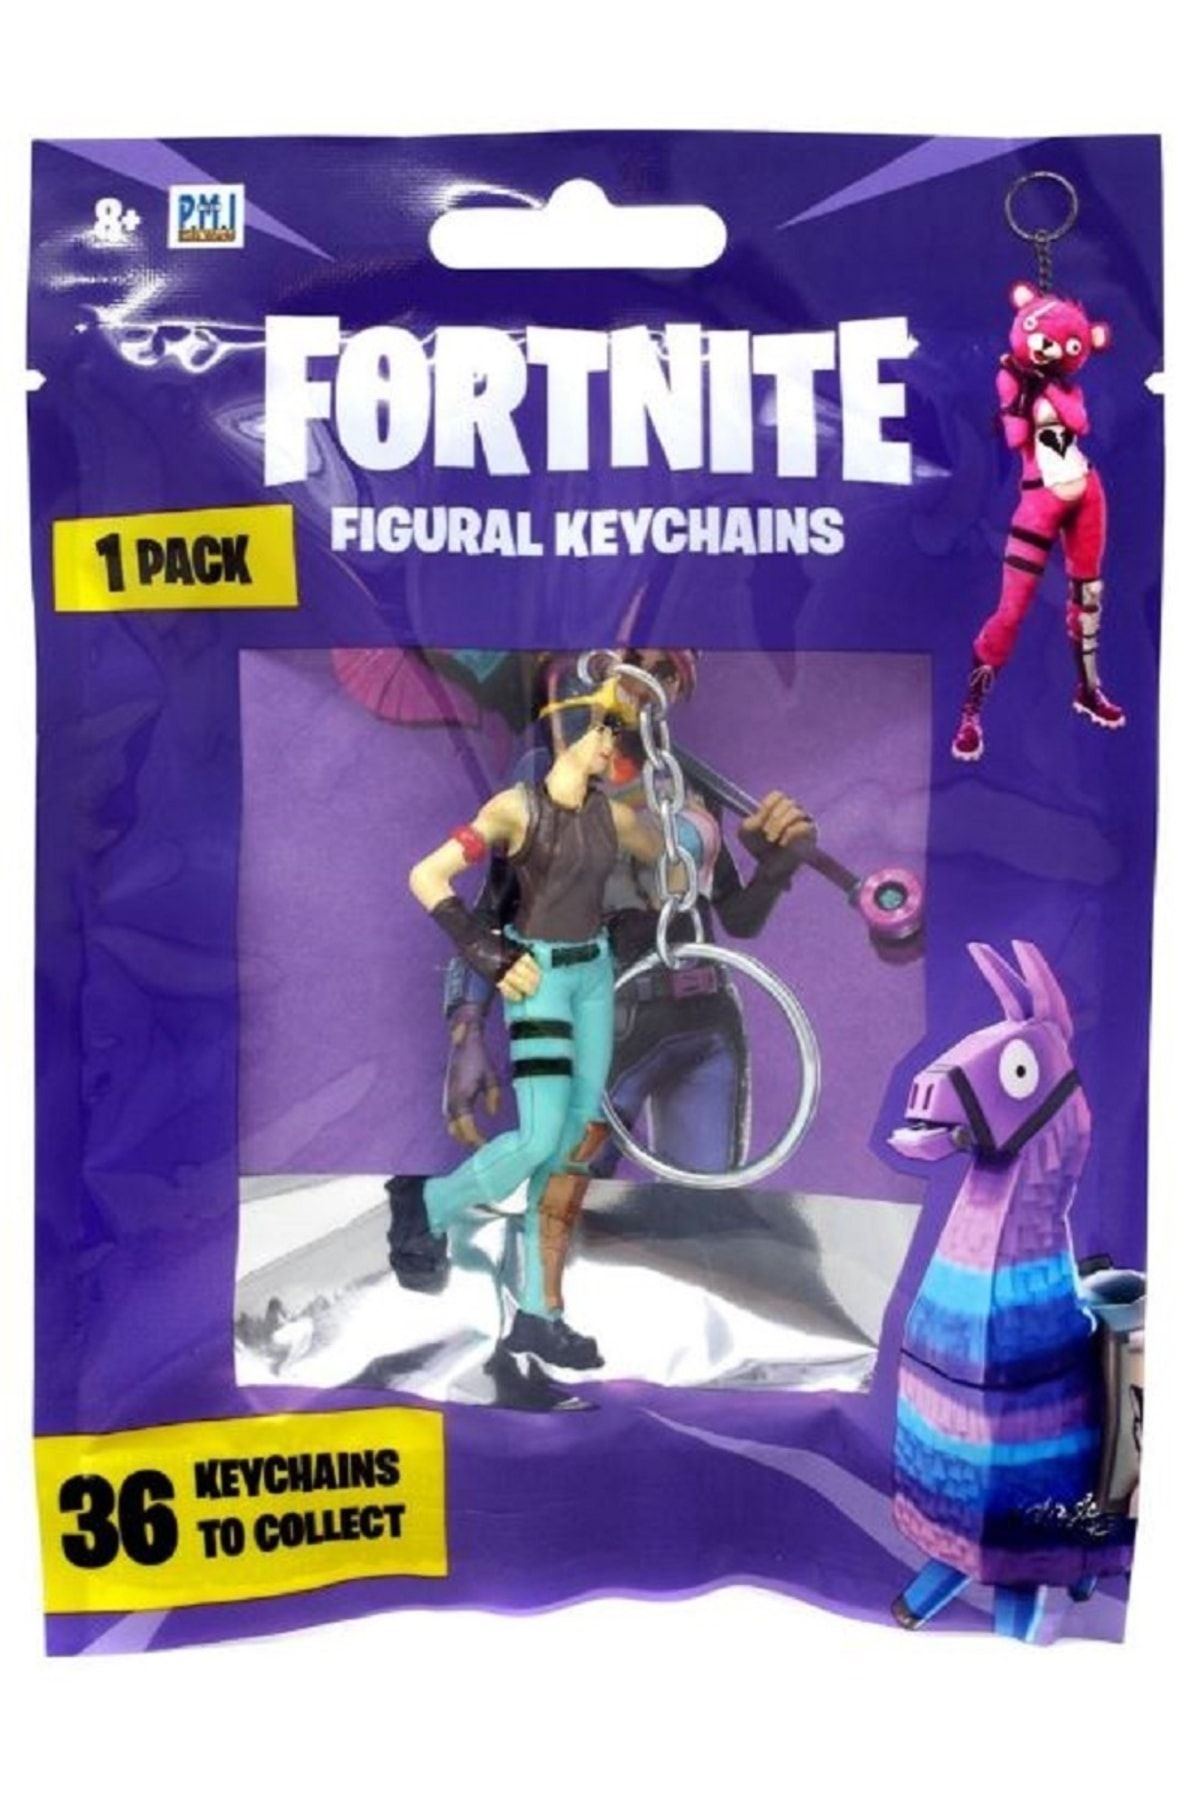 Fortnite Figural Keychain 1 Pack - Limited Edition